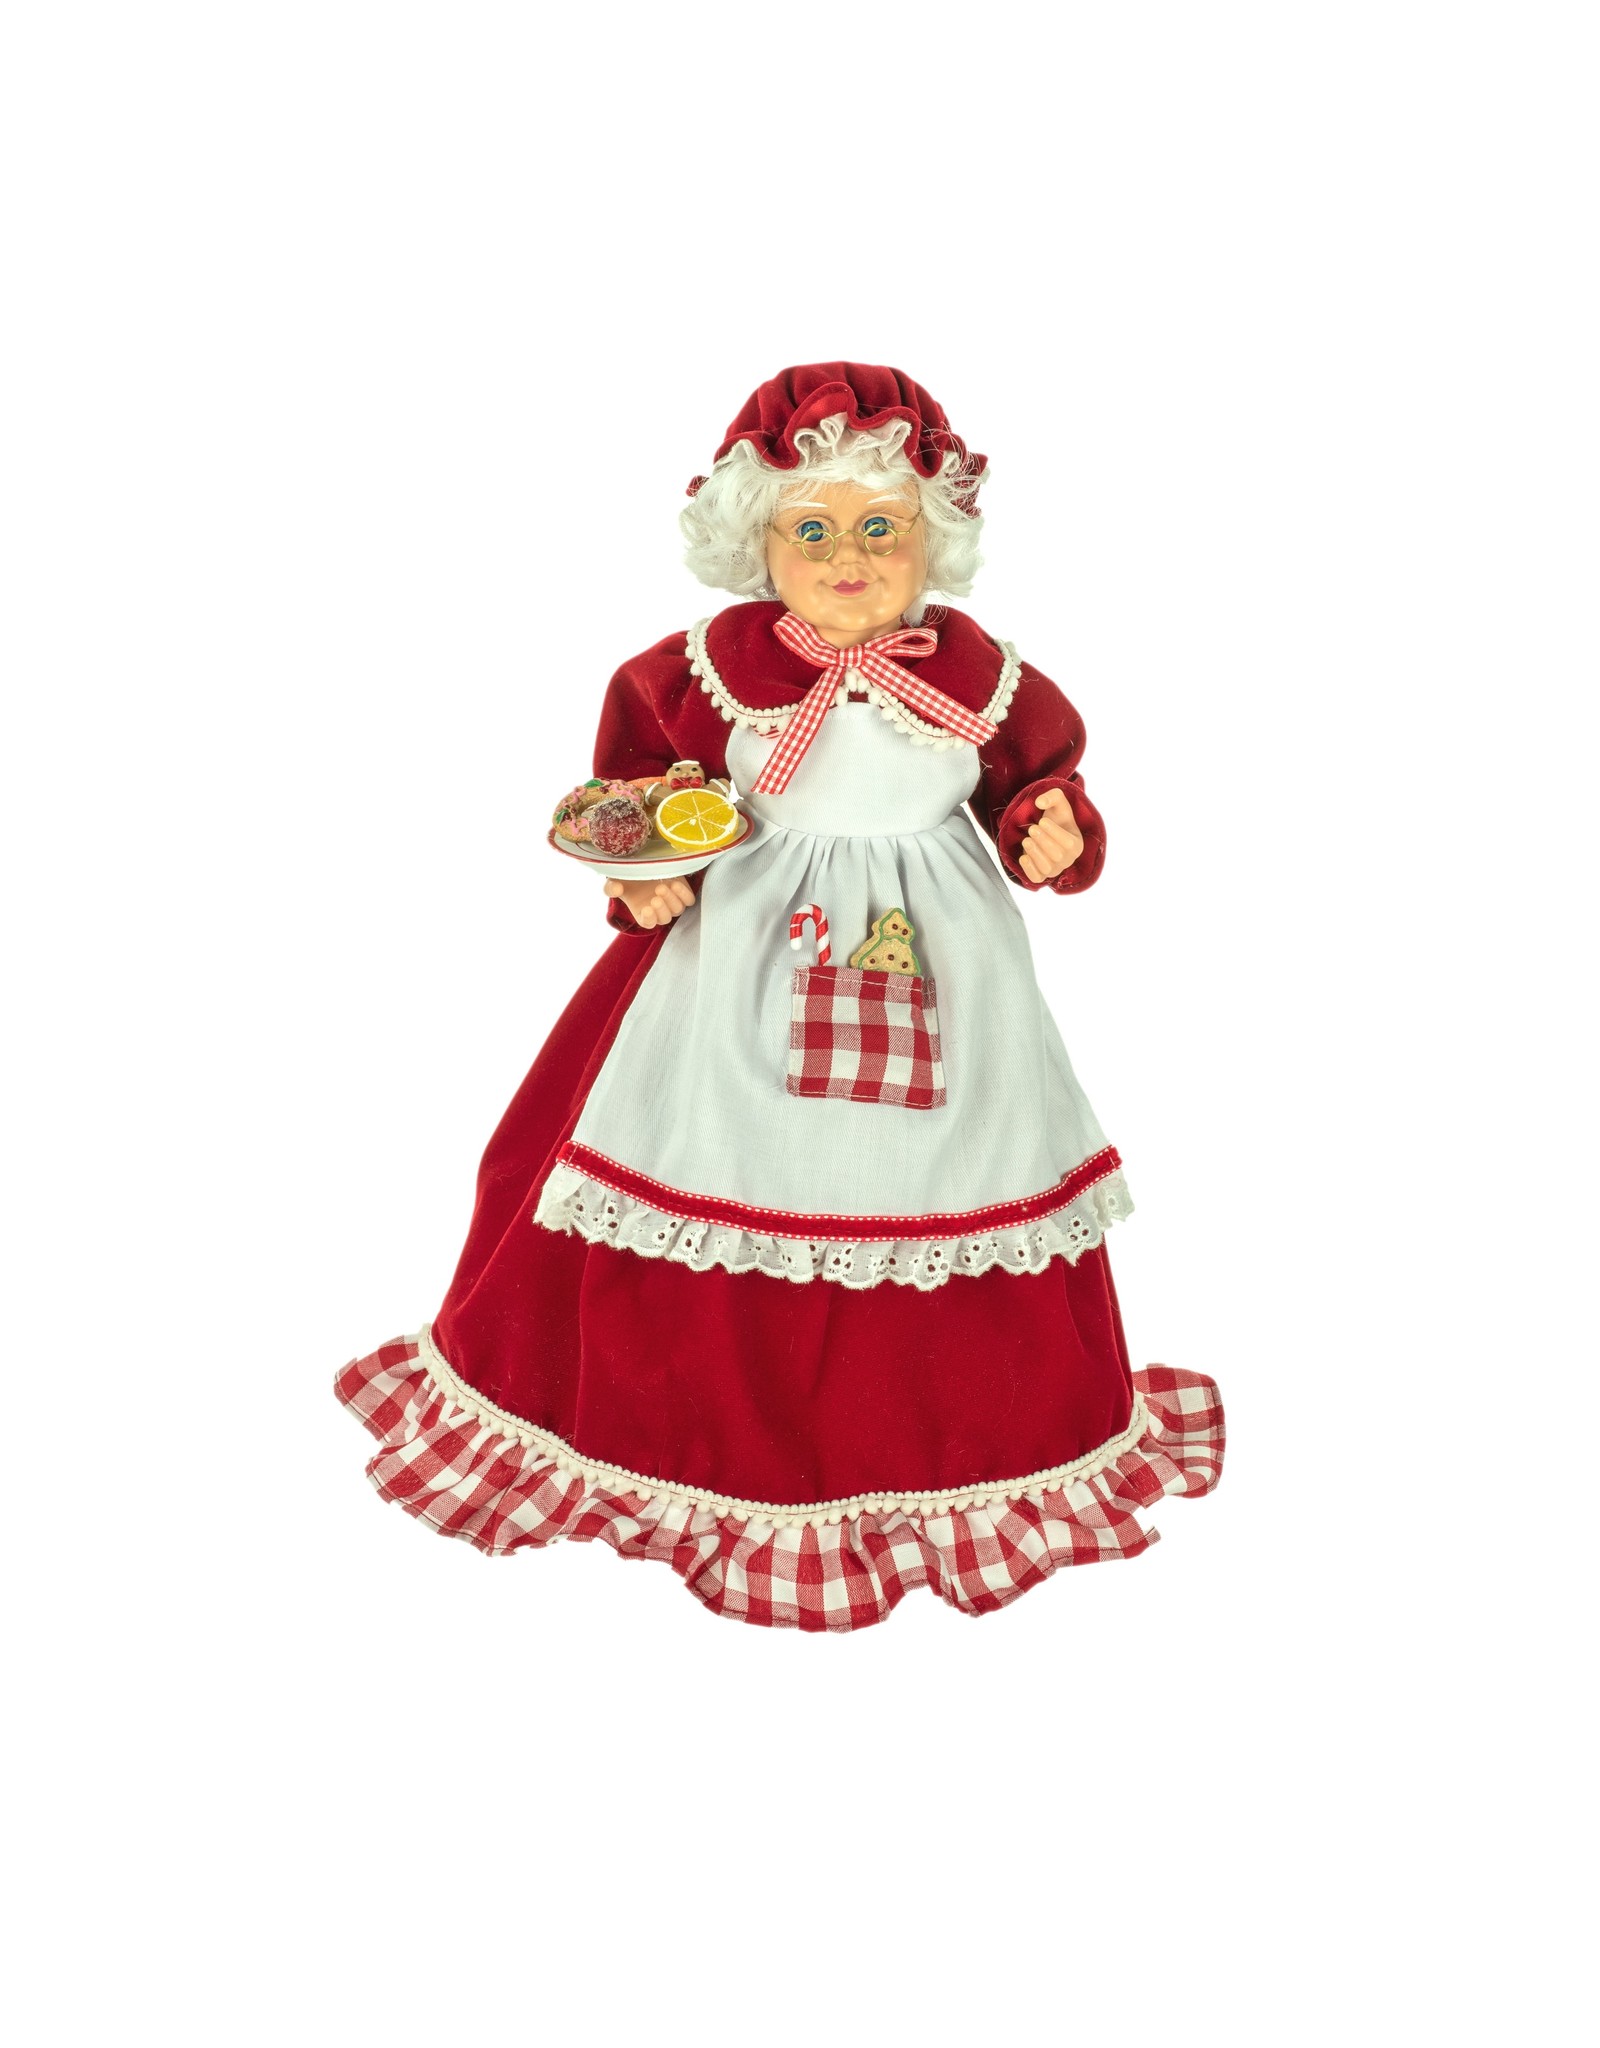 Mrs. Claus Holding Candy